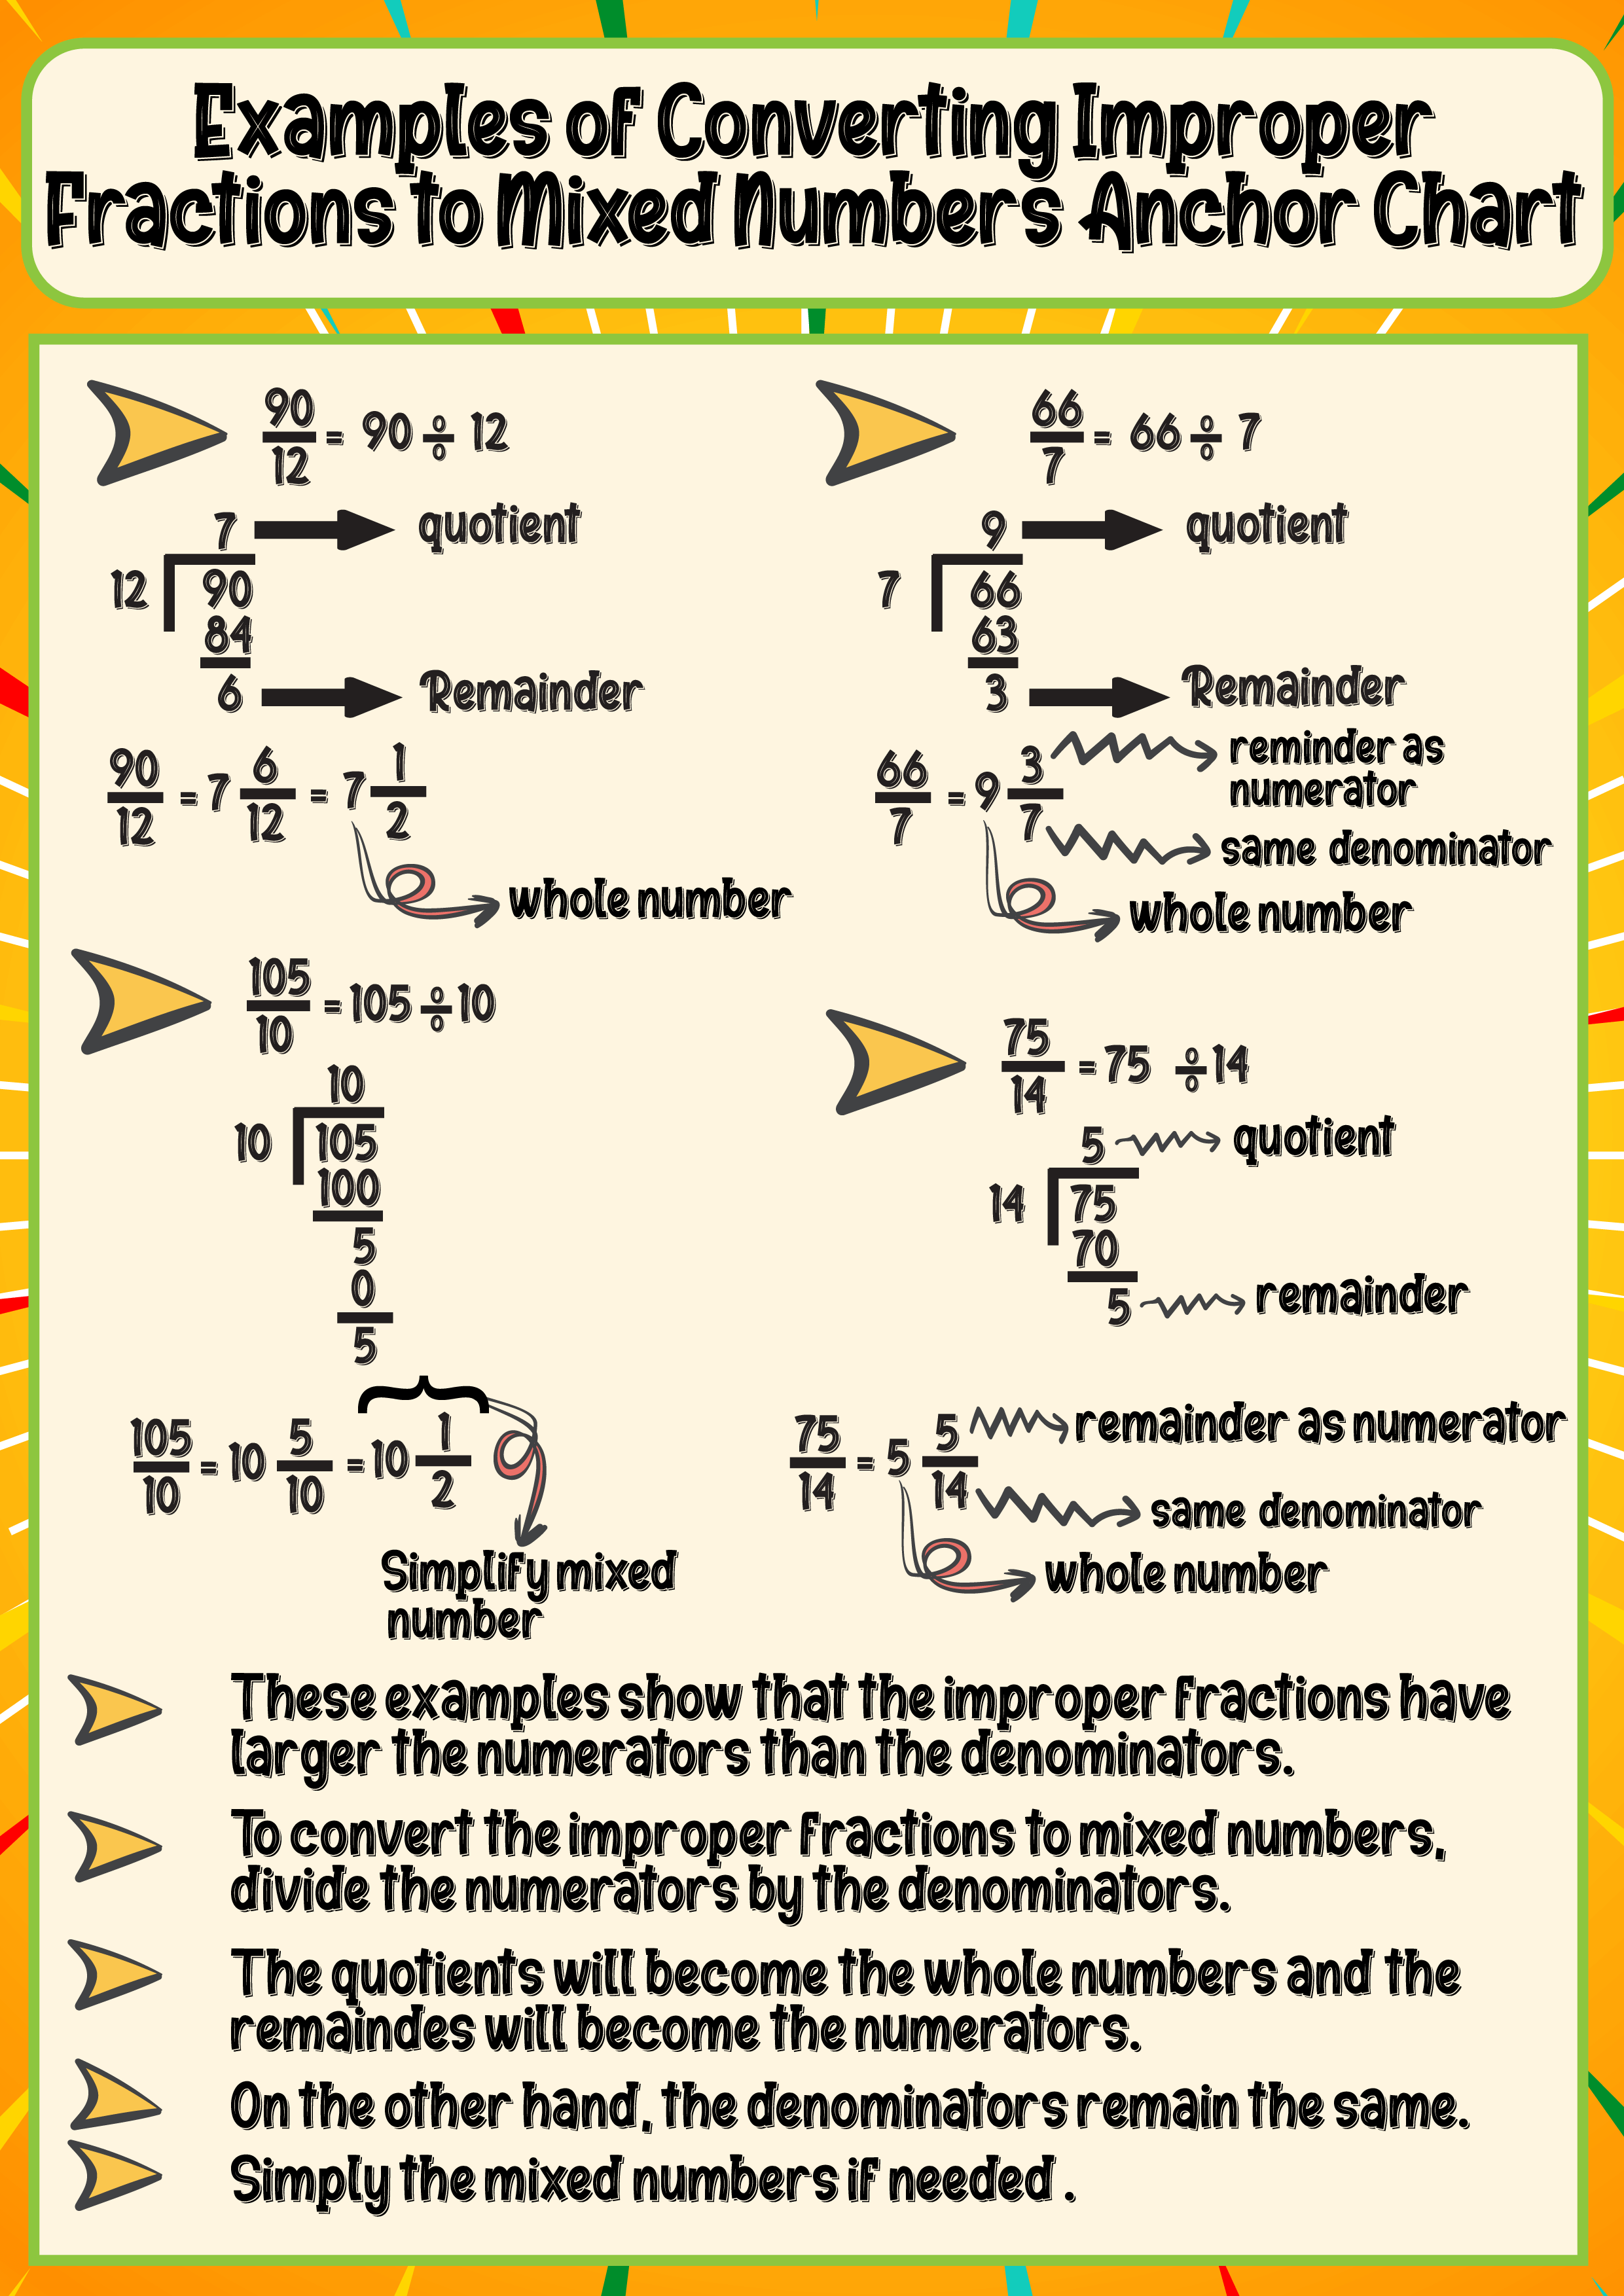 Converting improper fractions to mixed numbers overview